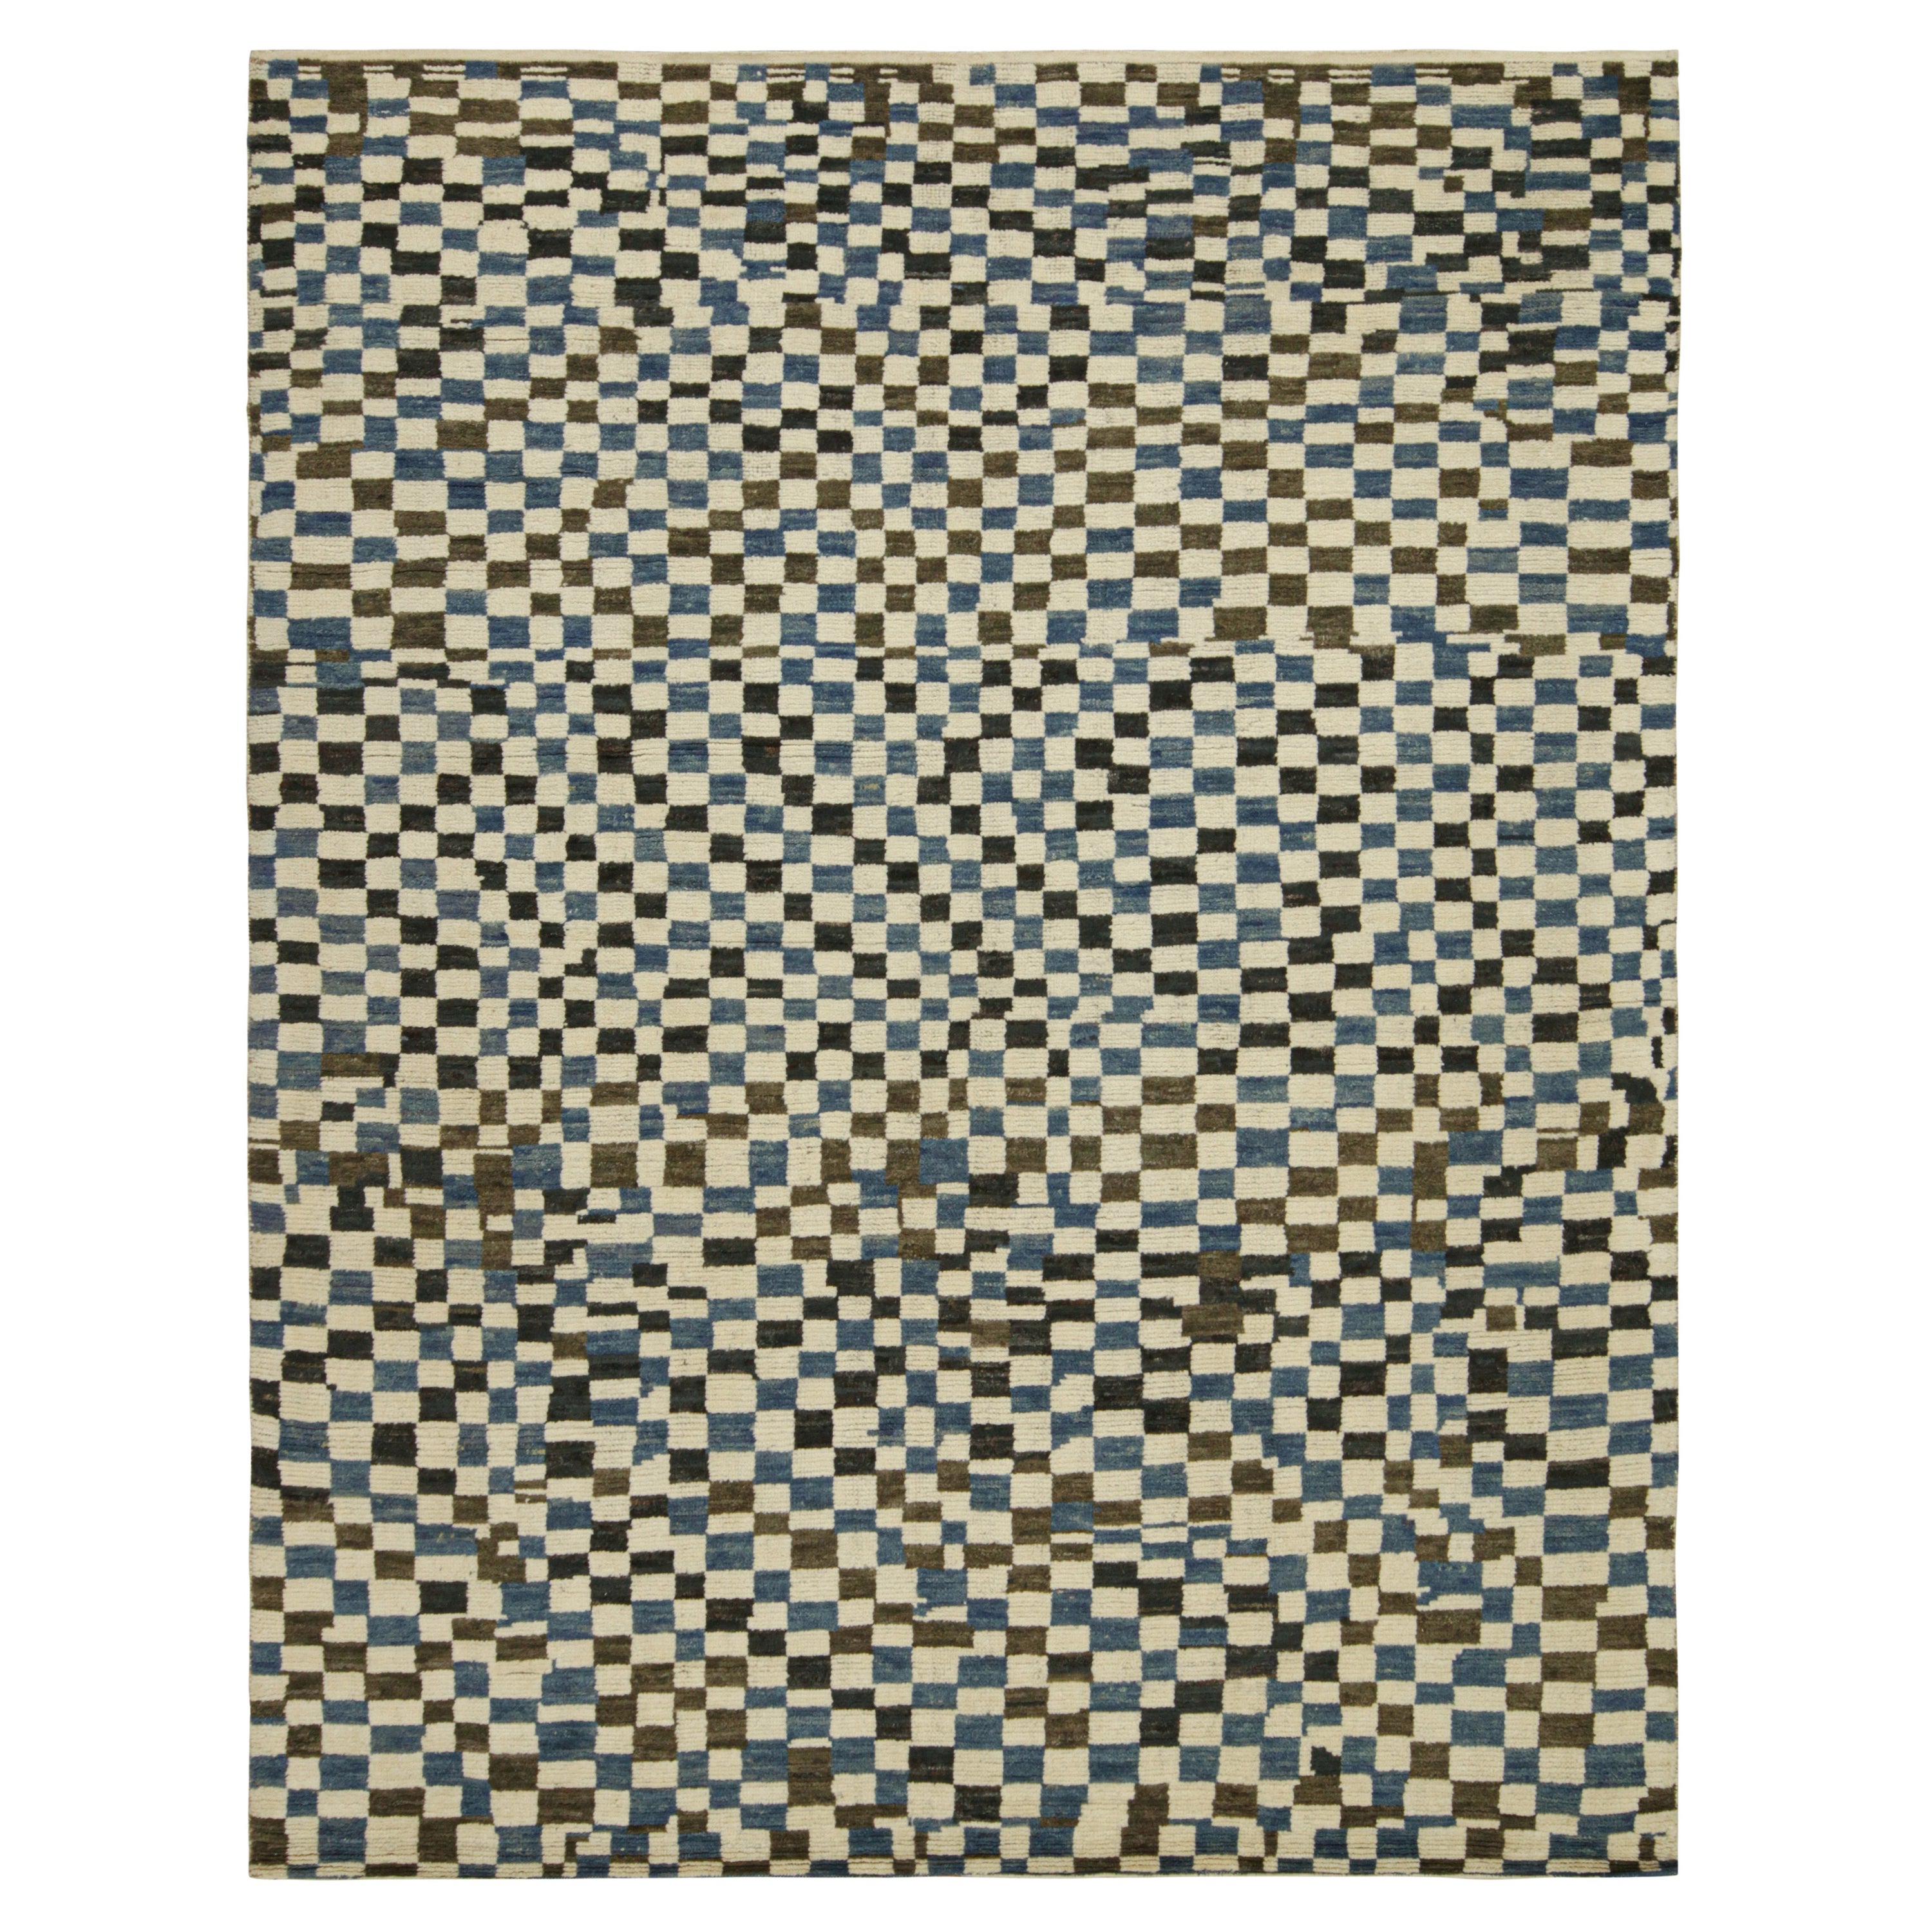 Rug & Kilim’s Moroccan Style Rug in White, Blue and Brown Checkered Pattern